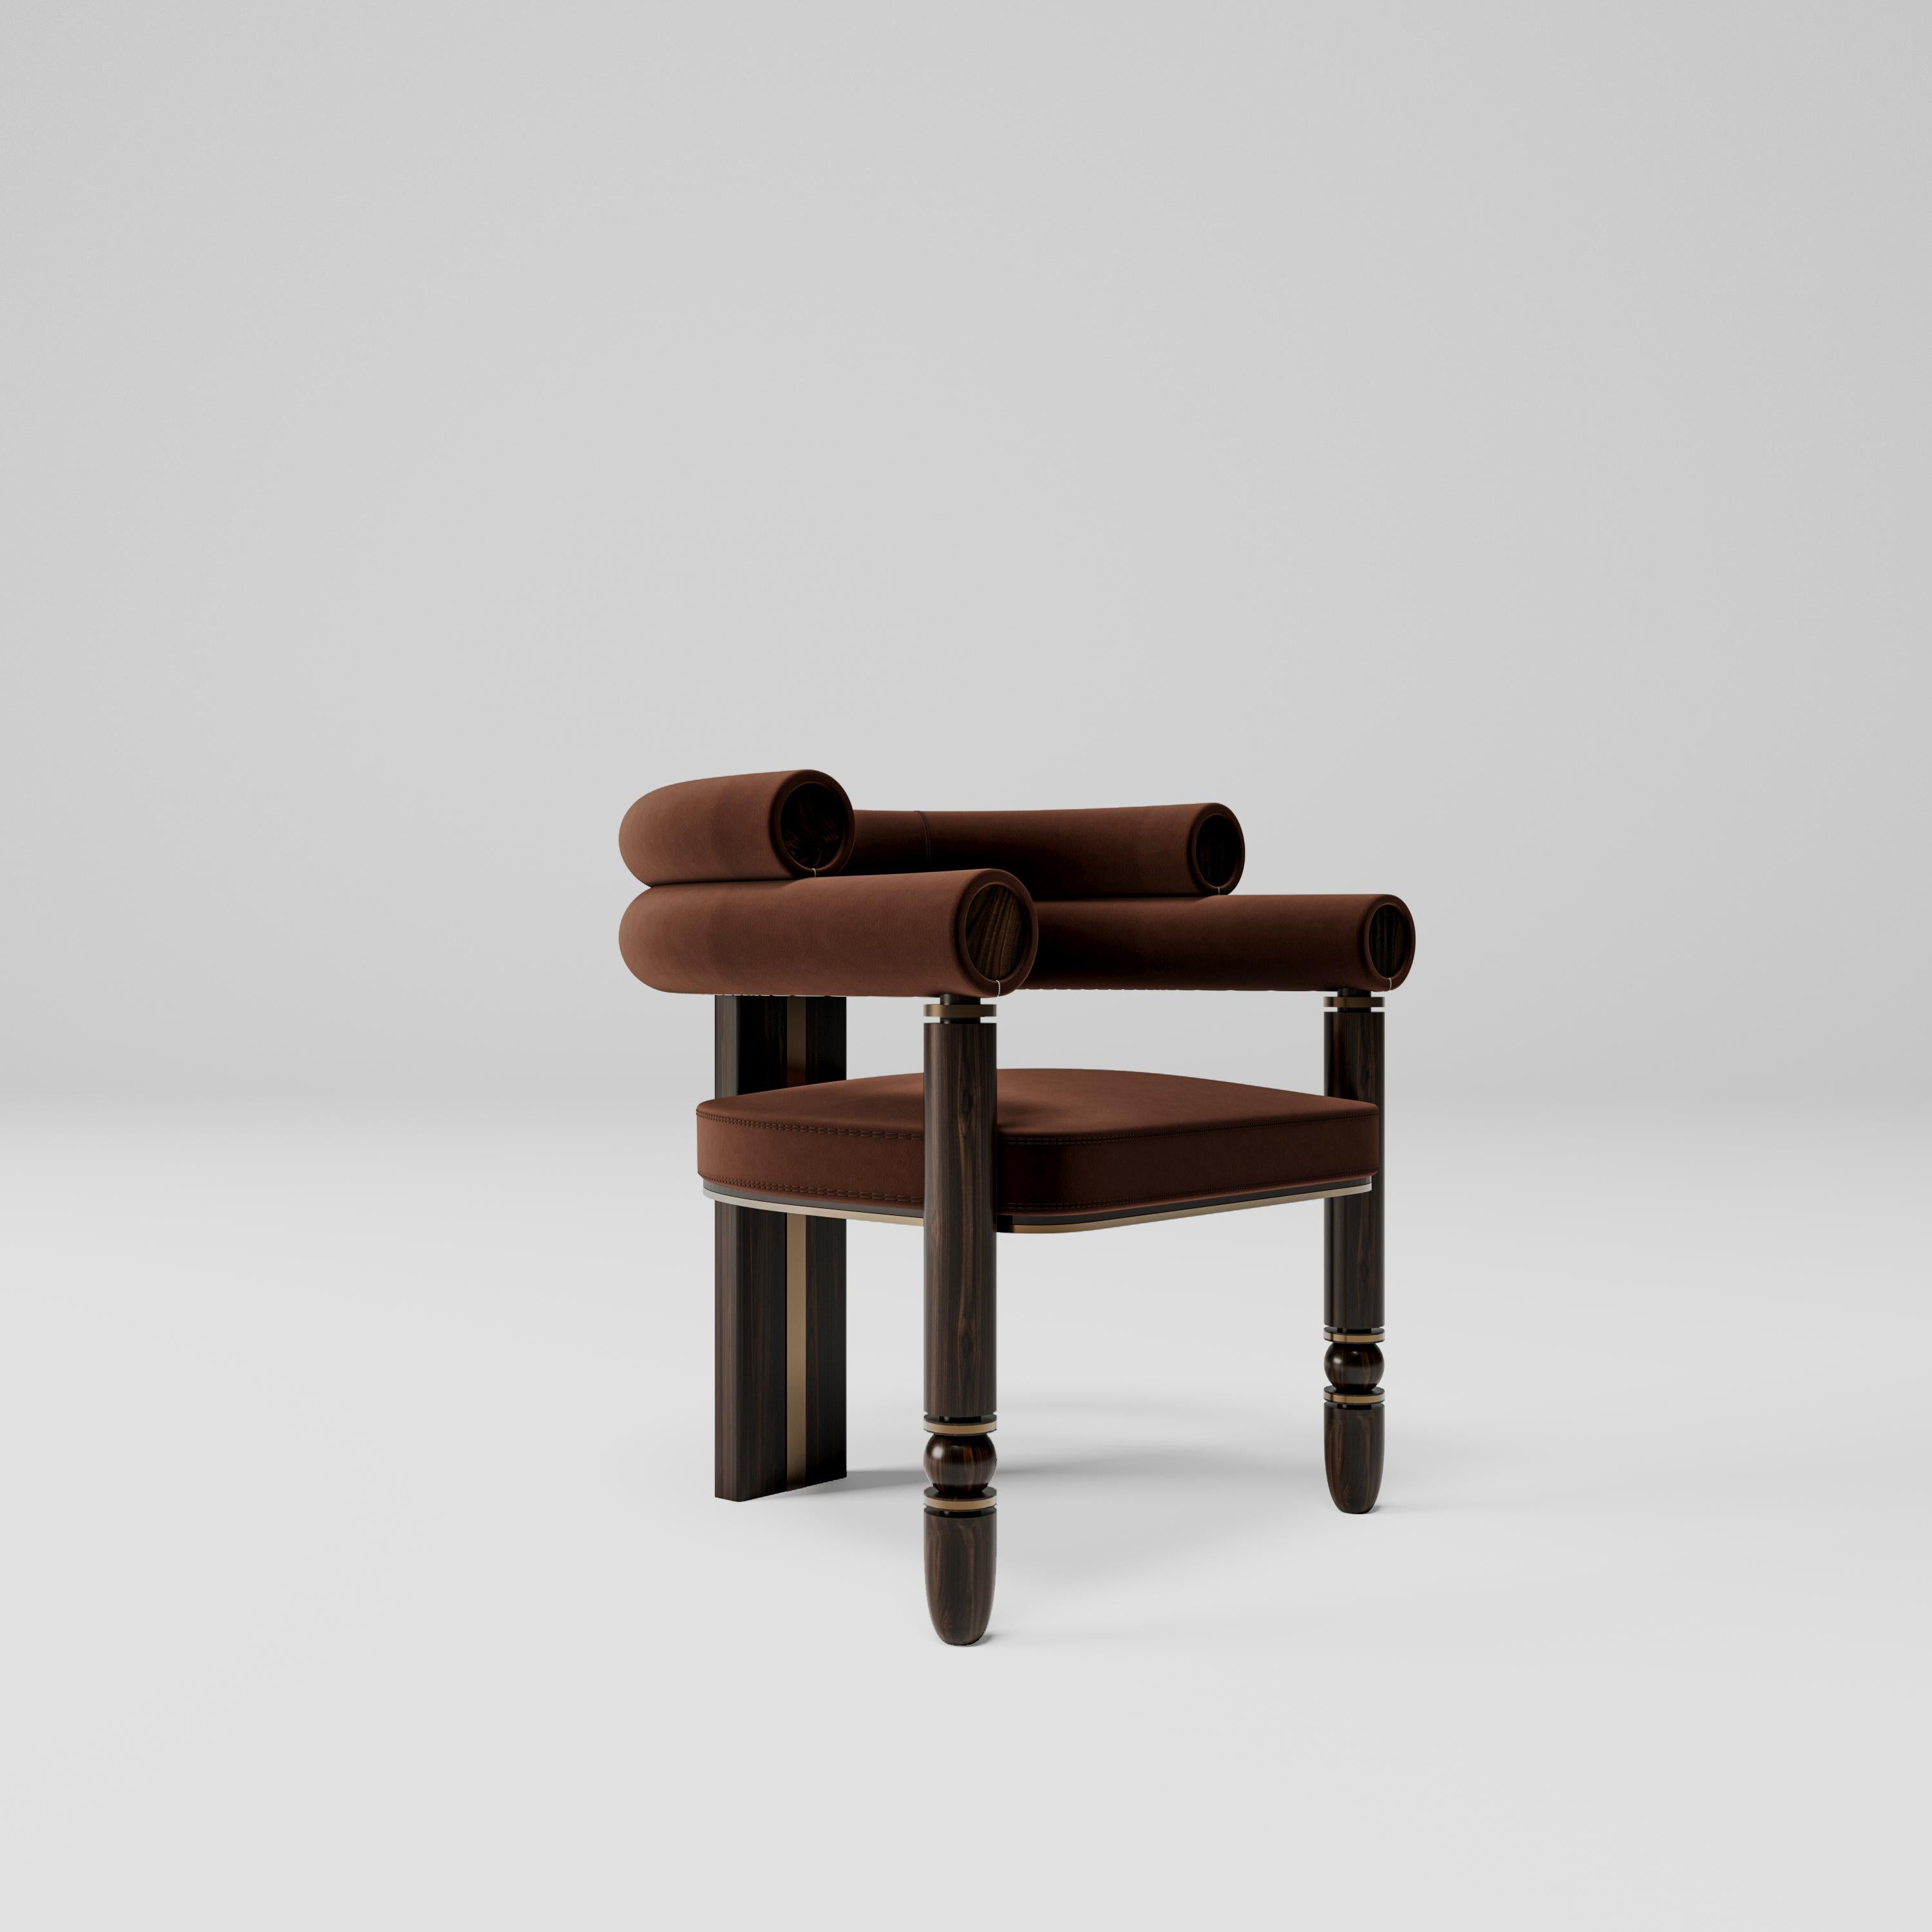 Anatolian Chair

Taking its flamboyant and sociable attitude from the color of brass, and its naive and shy attitude from chestnut wood, the Anatolian chair transforms into a Mid-Century style with its velvet upholstery. Designer Mehmet Orel, who